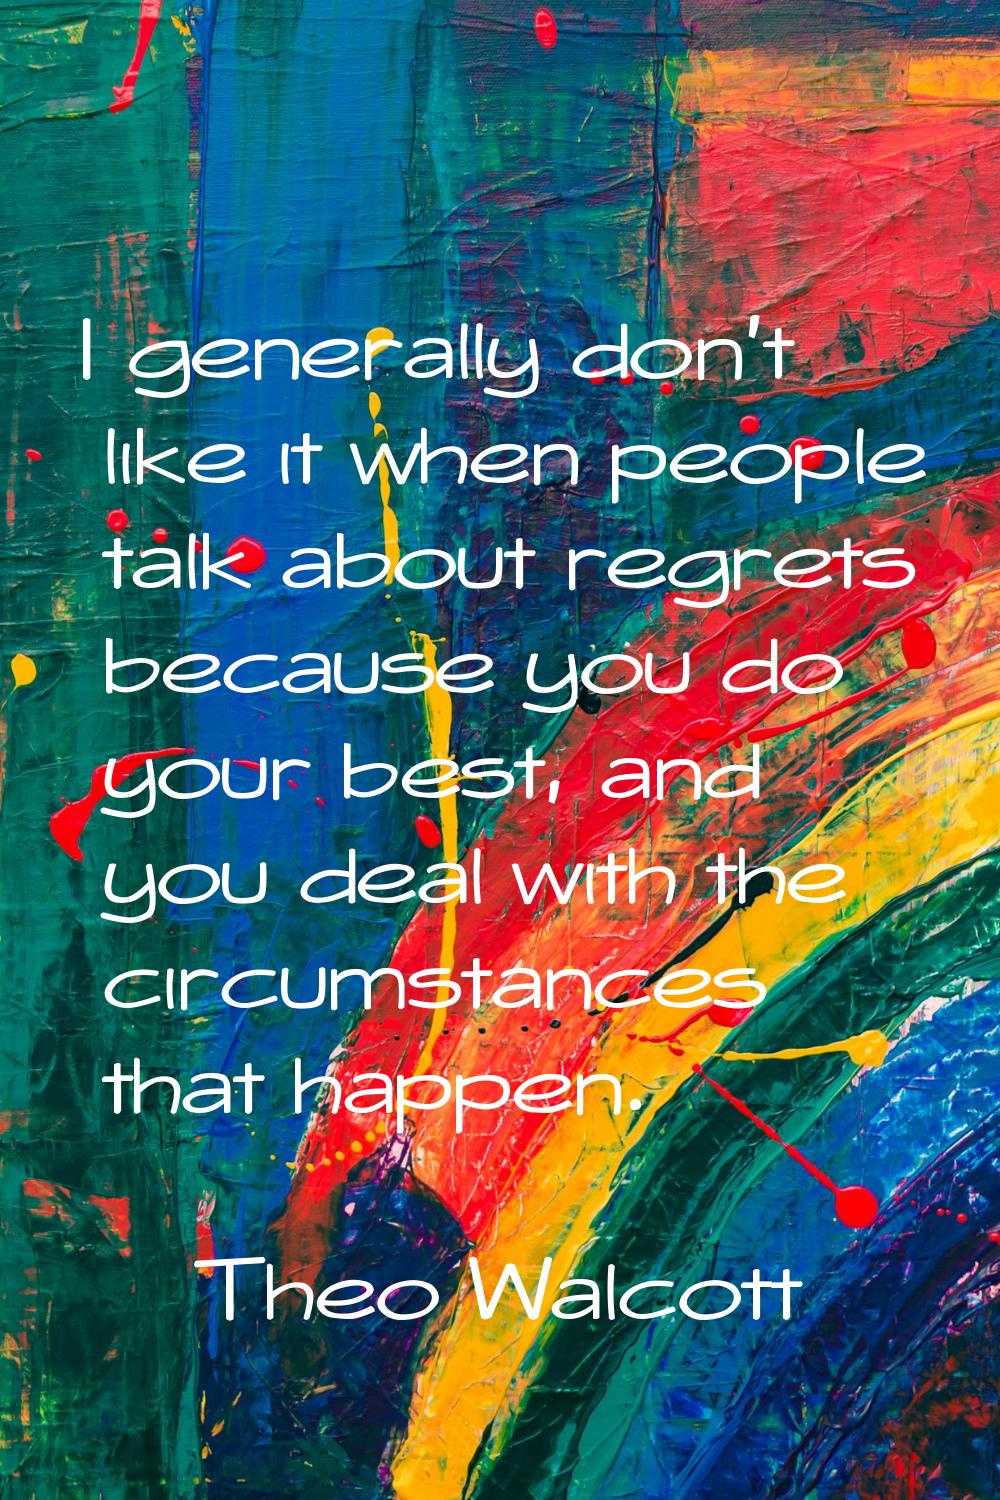 I generally don't like it when people talk about regrets because you do your best, and you deal wit